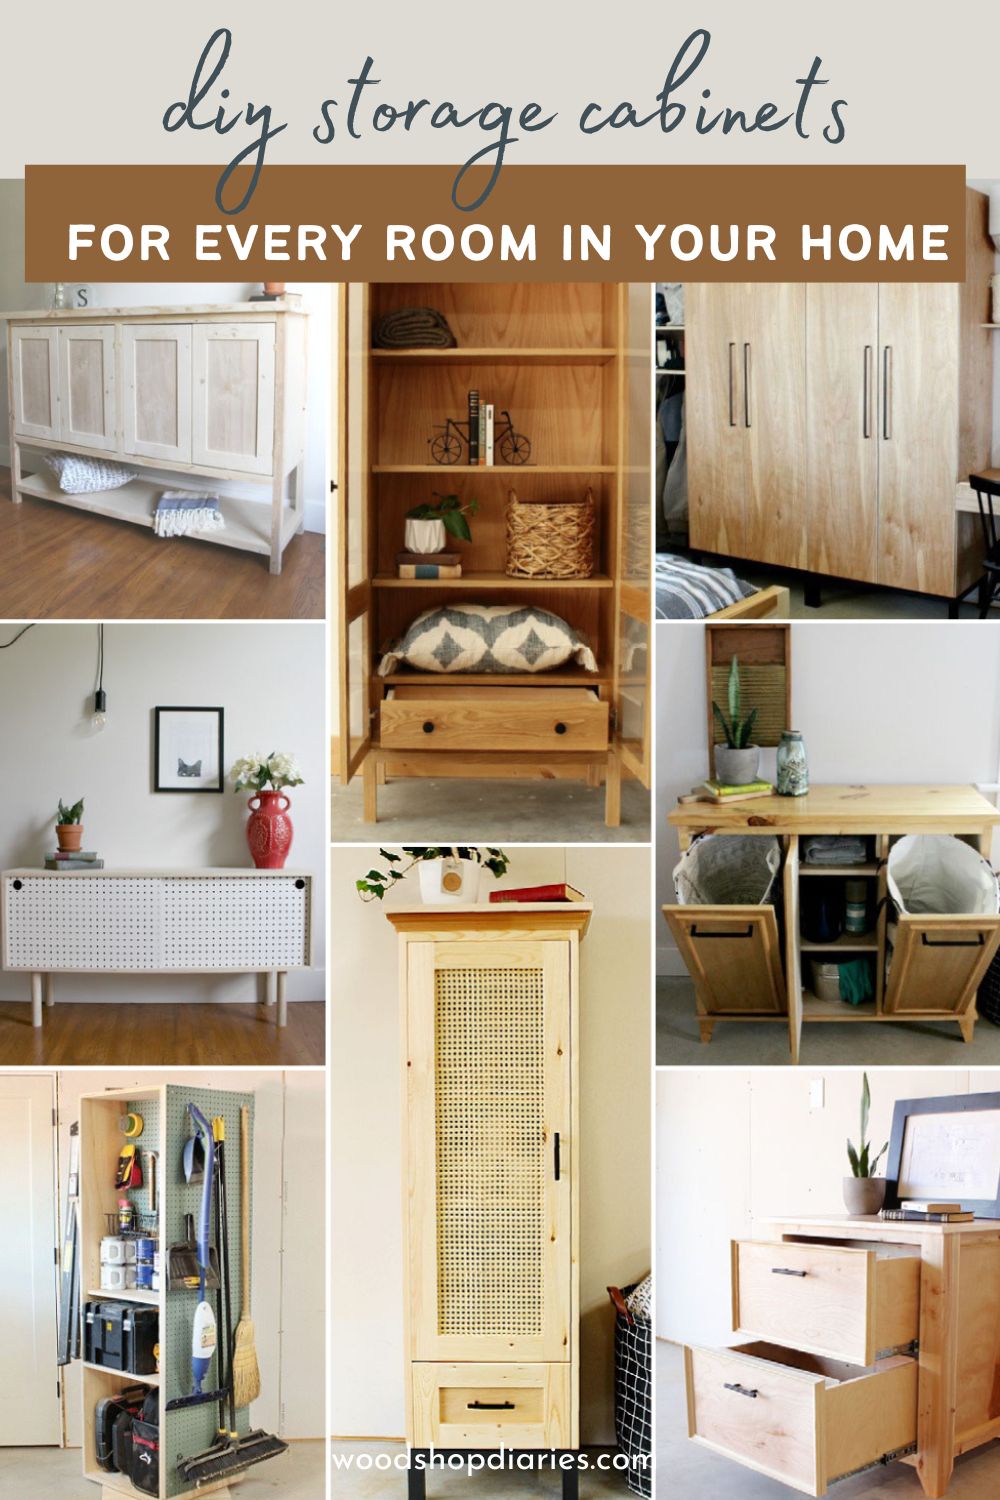 image collage of eight diy cabinets with text overlay "DIY storage cabinets for every room in your home